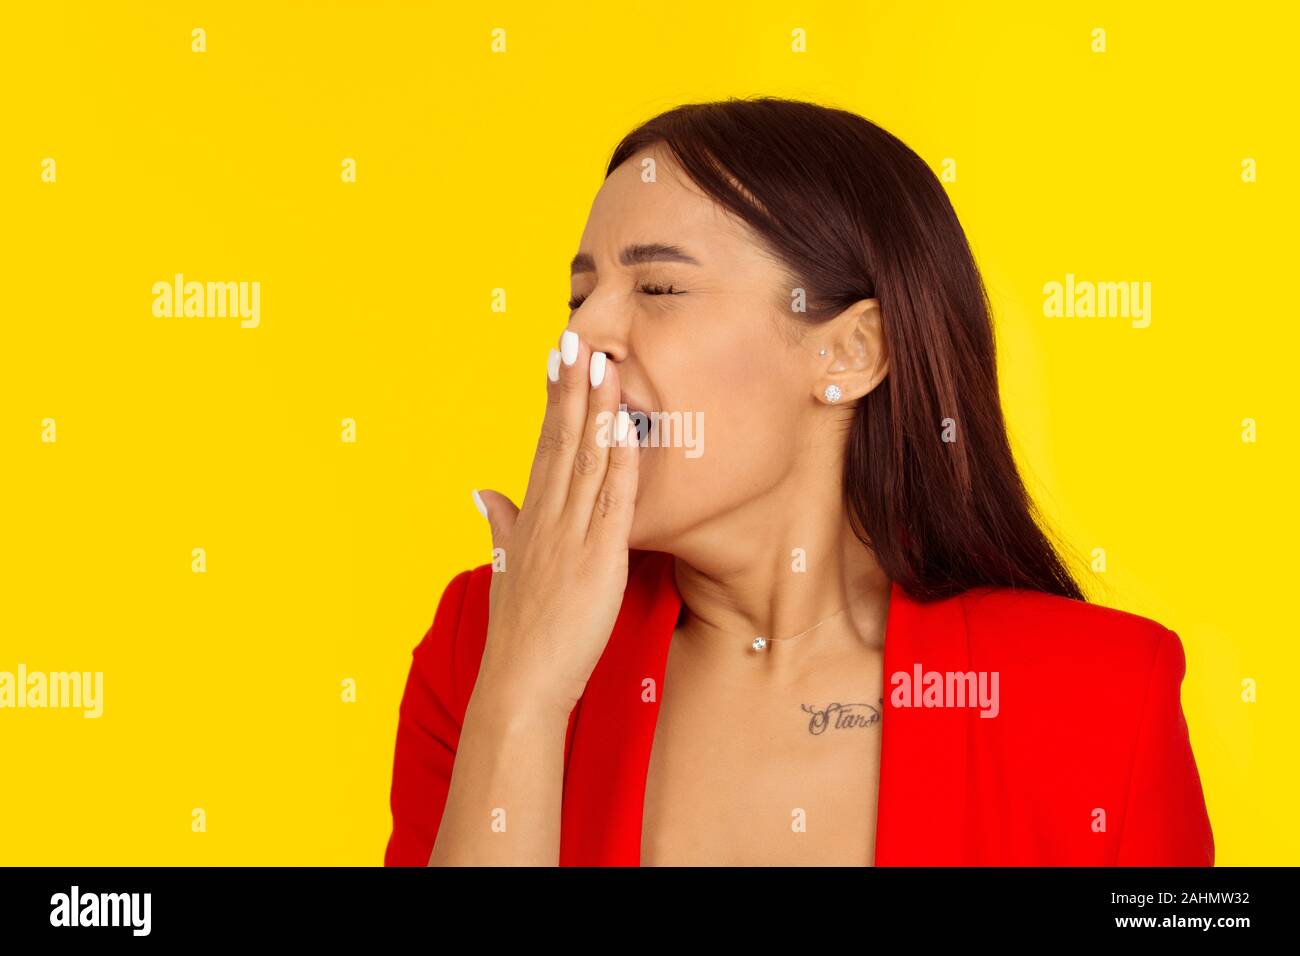 sleepy woman with wide open mouth yawning eyes closed looking bored. Human face expression emotion. Mixed race model isolated on yellow background wit Stock Photo